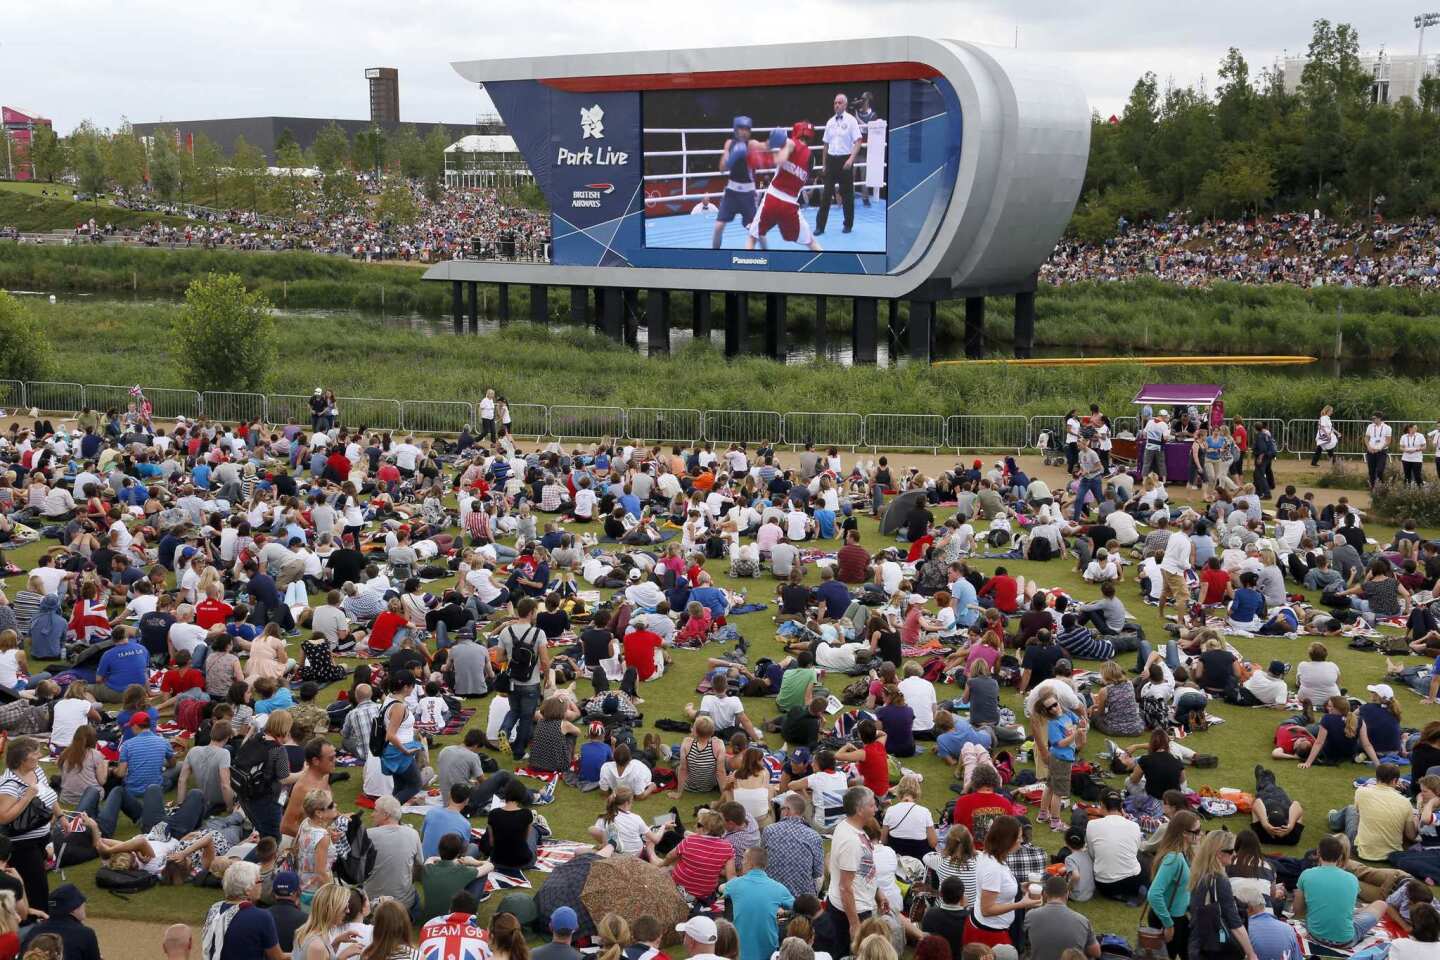 Spectators sit on the grass and watch women's boxing on a giant monitor in Park Live, a free area inside Olympic Park.